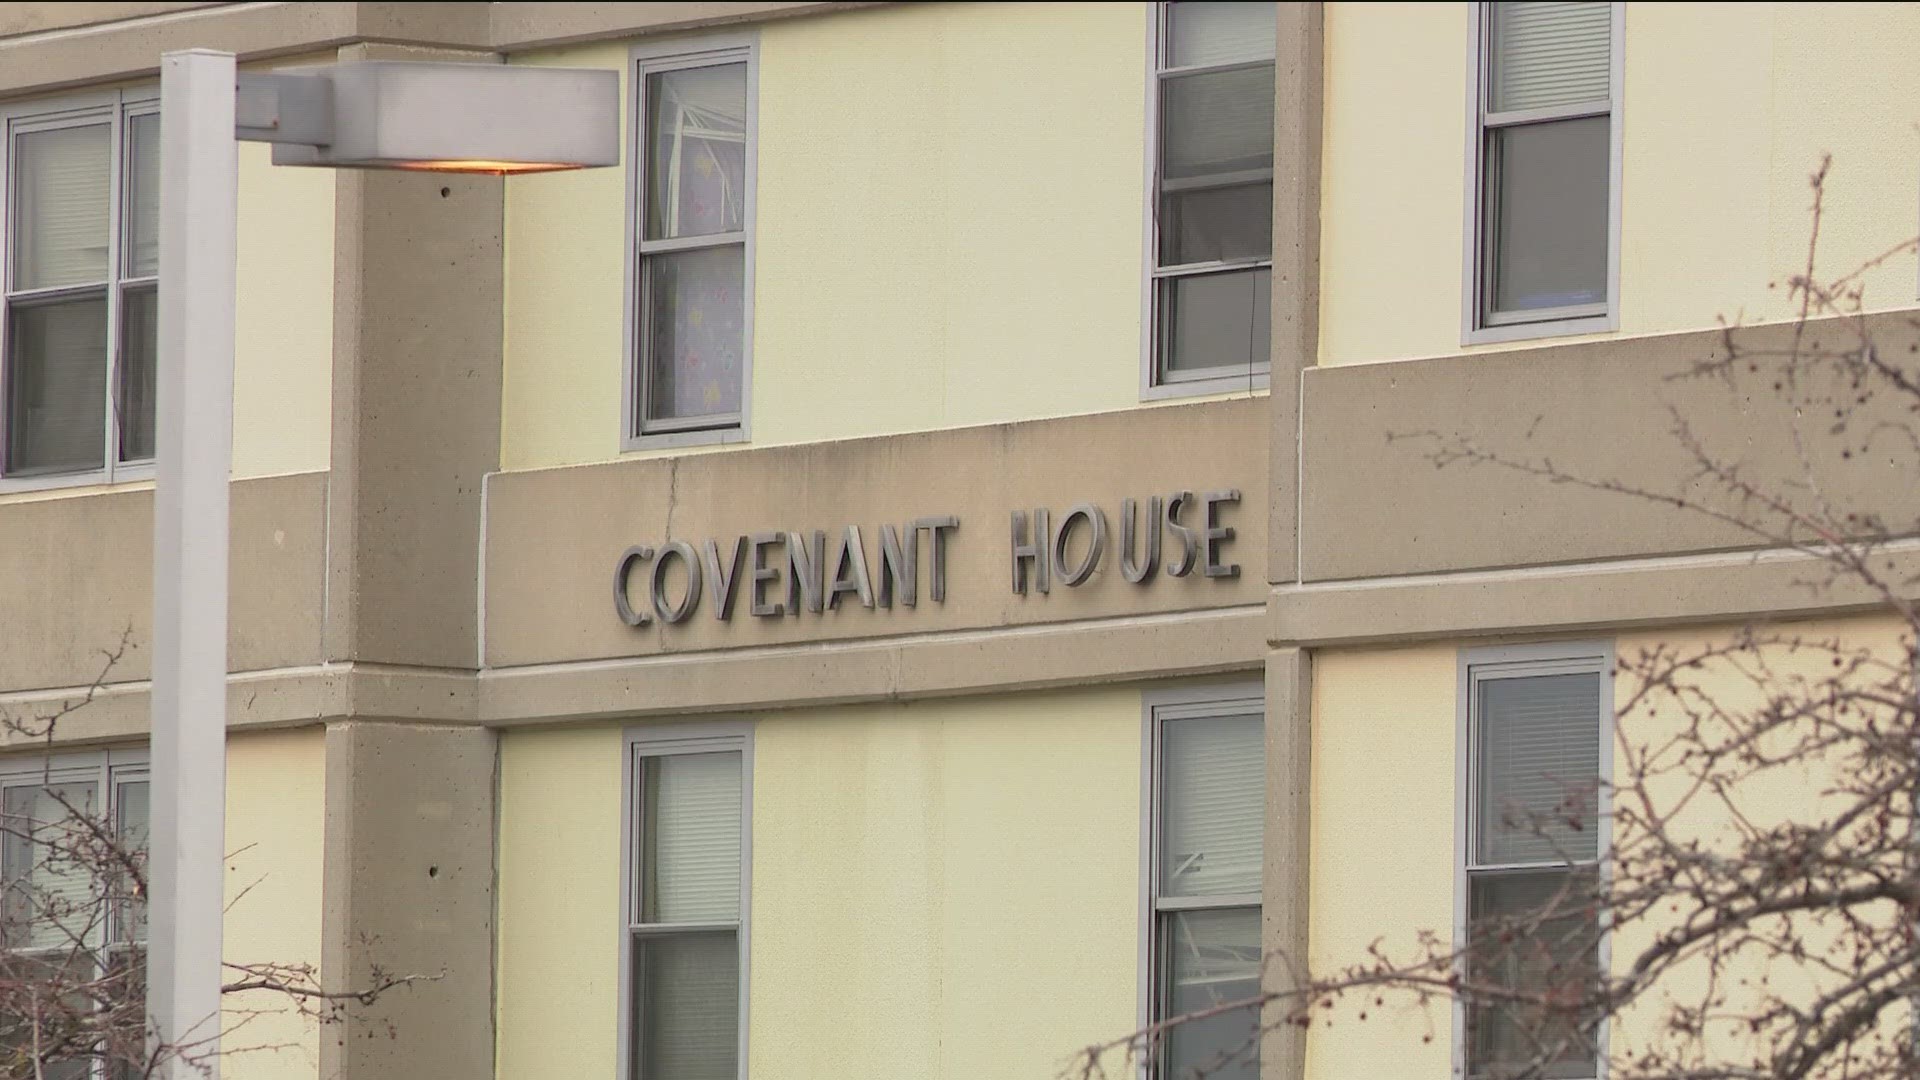 Brown's office has been in contact with Toledo City Council member Vanice Williams and others to address tenant concerns at Covenant House.